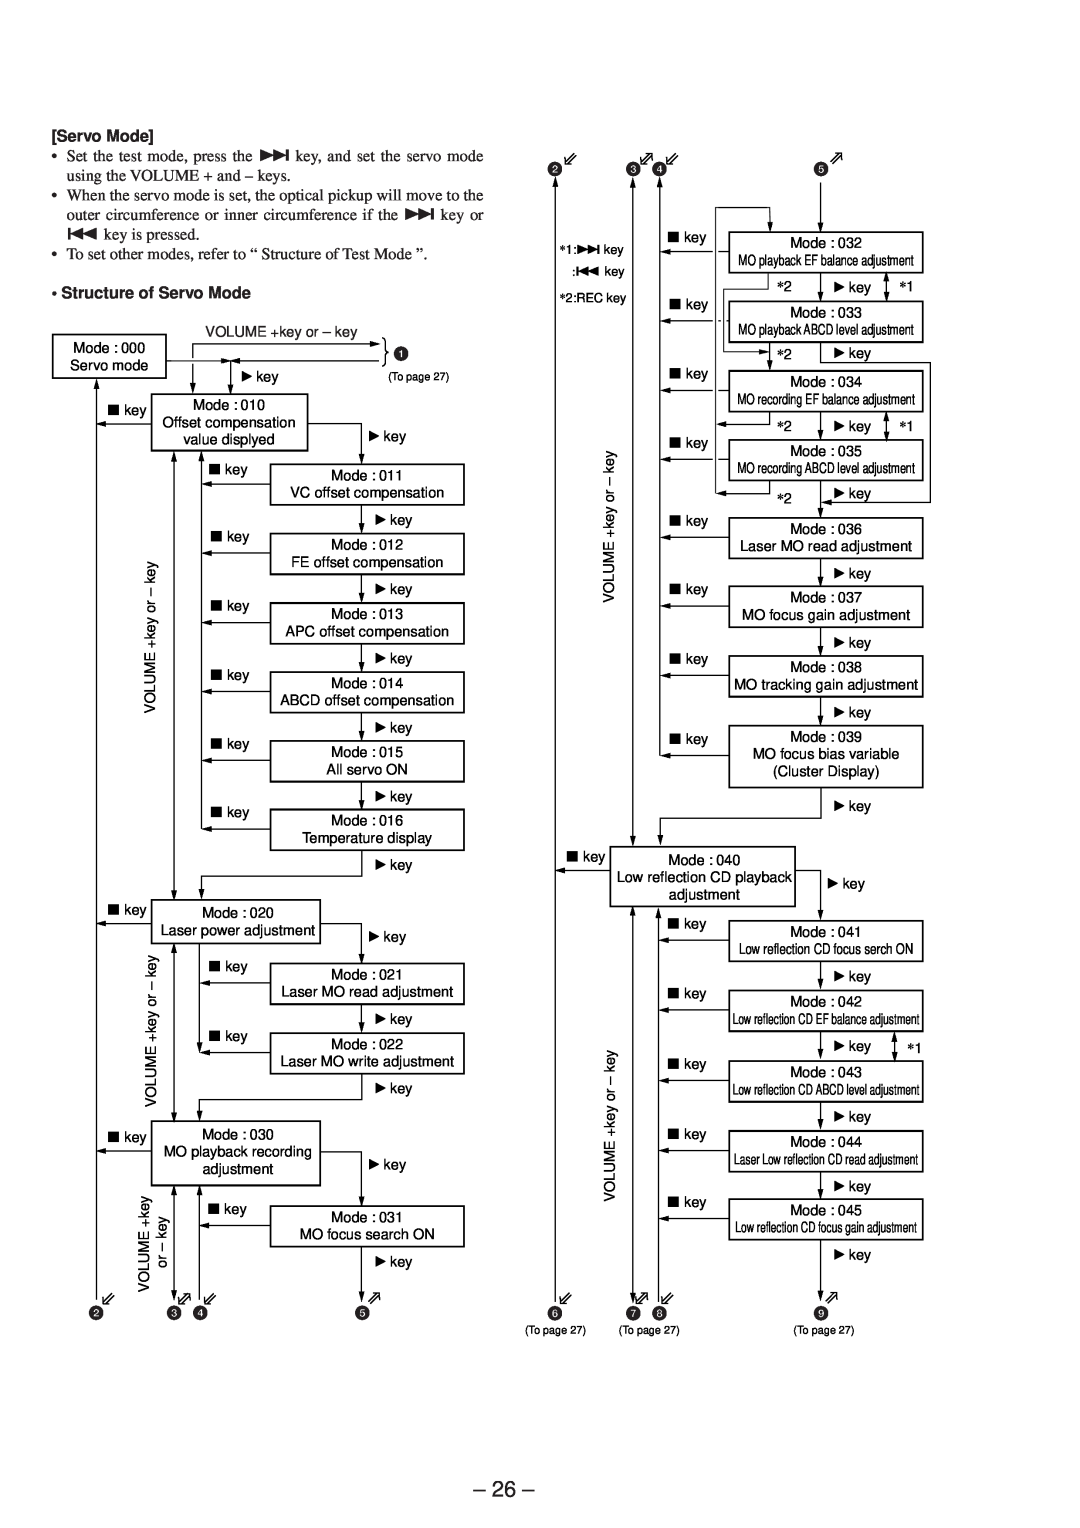 Sony MZ-R50 service manual Structure of Servo Mode 